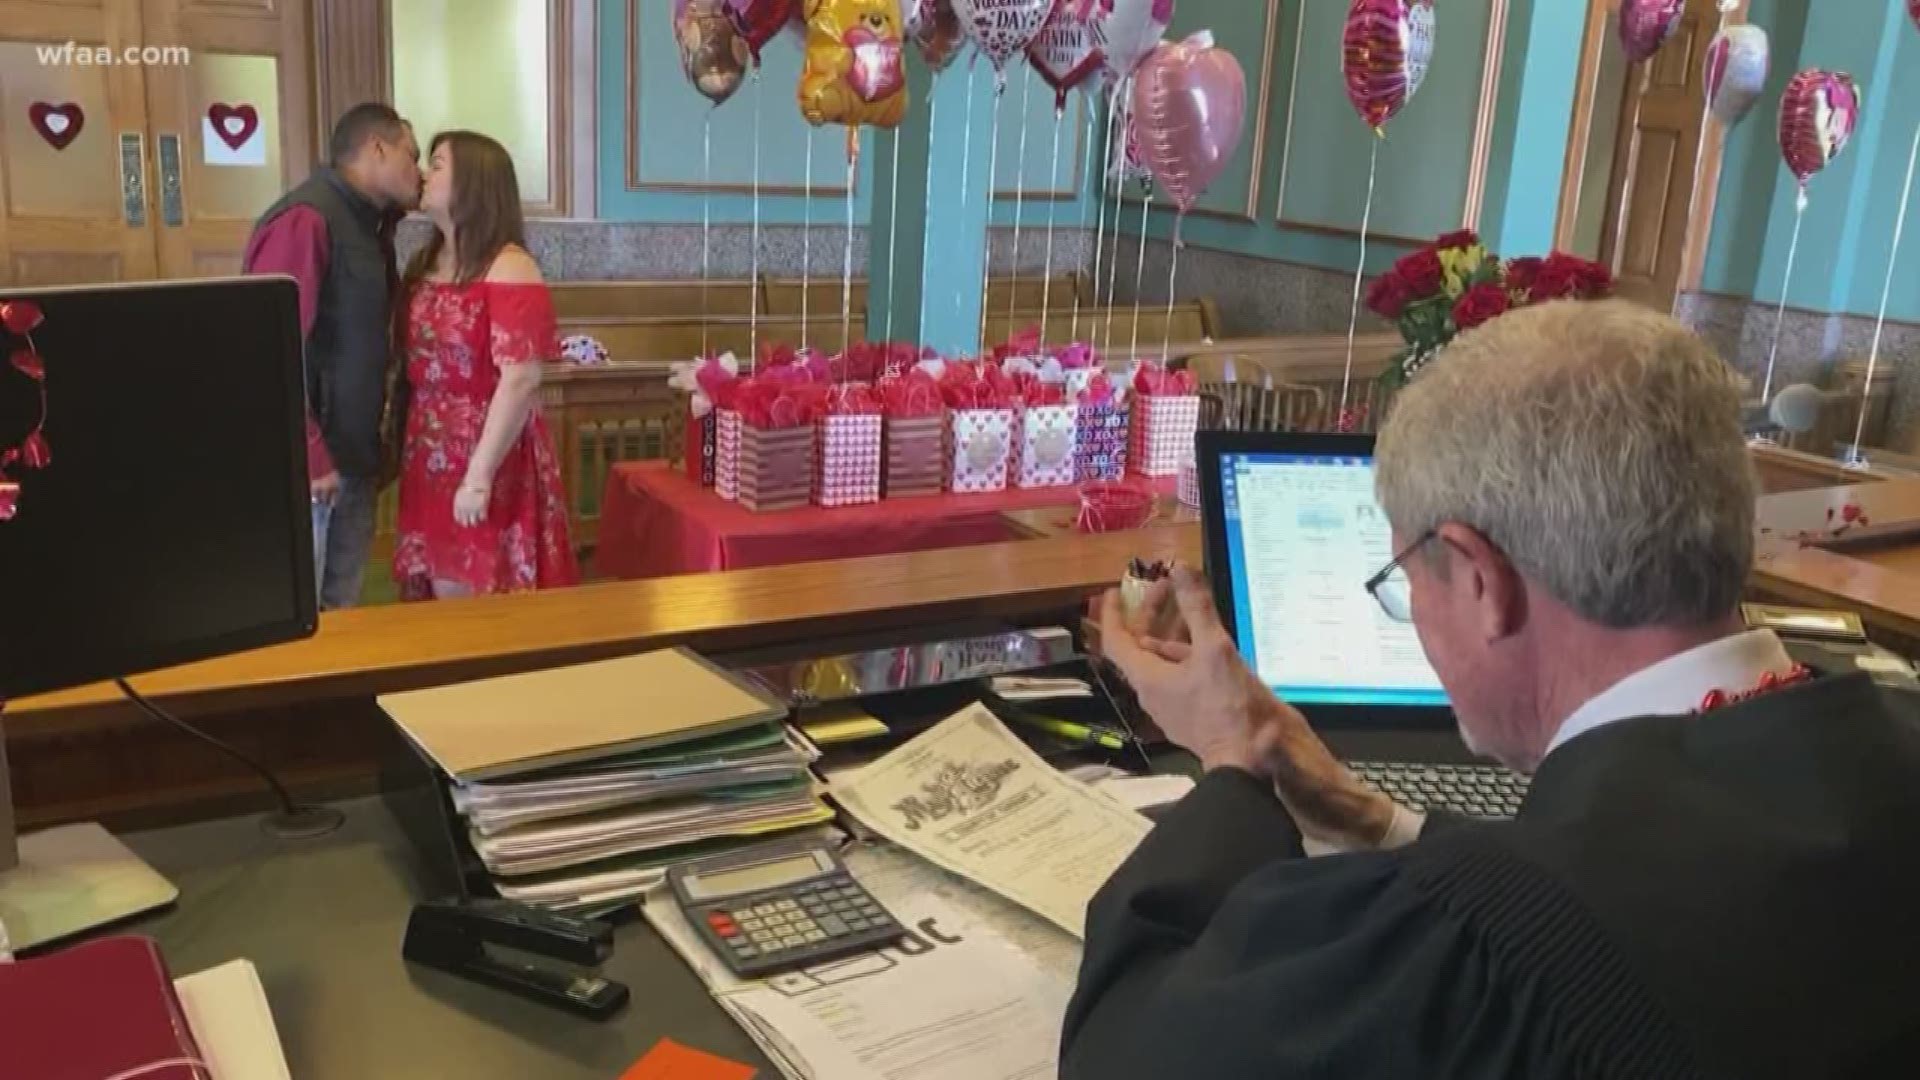 Ralph Swearingin, Jr., justice of the peace, gave out gifts and balloons to everyone who got married in his elaborately-decorated courtroom Friday.